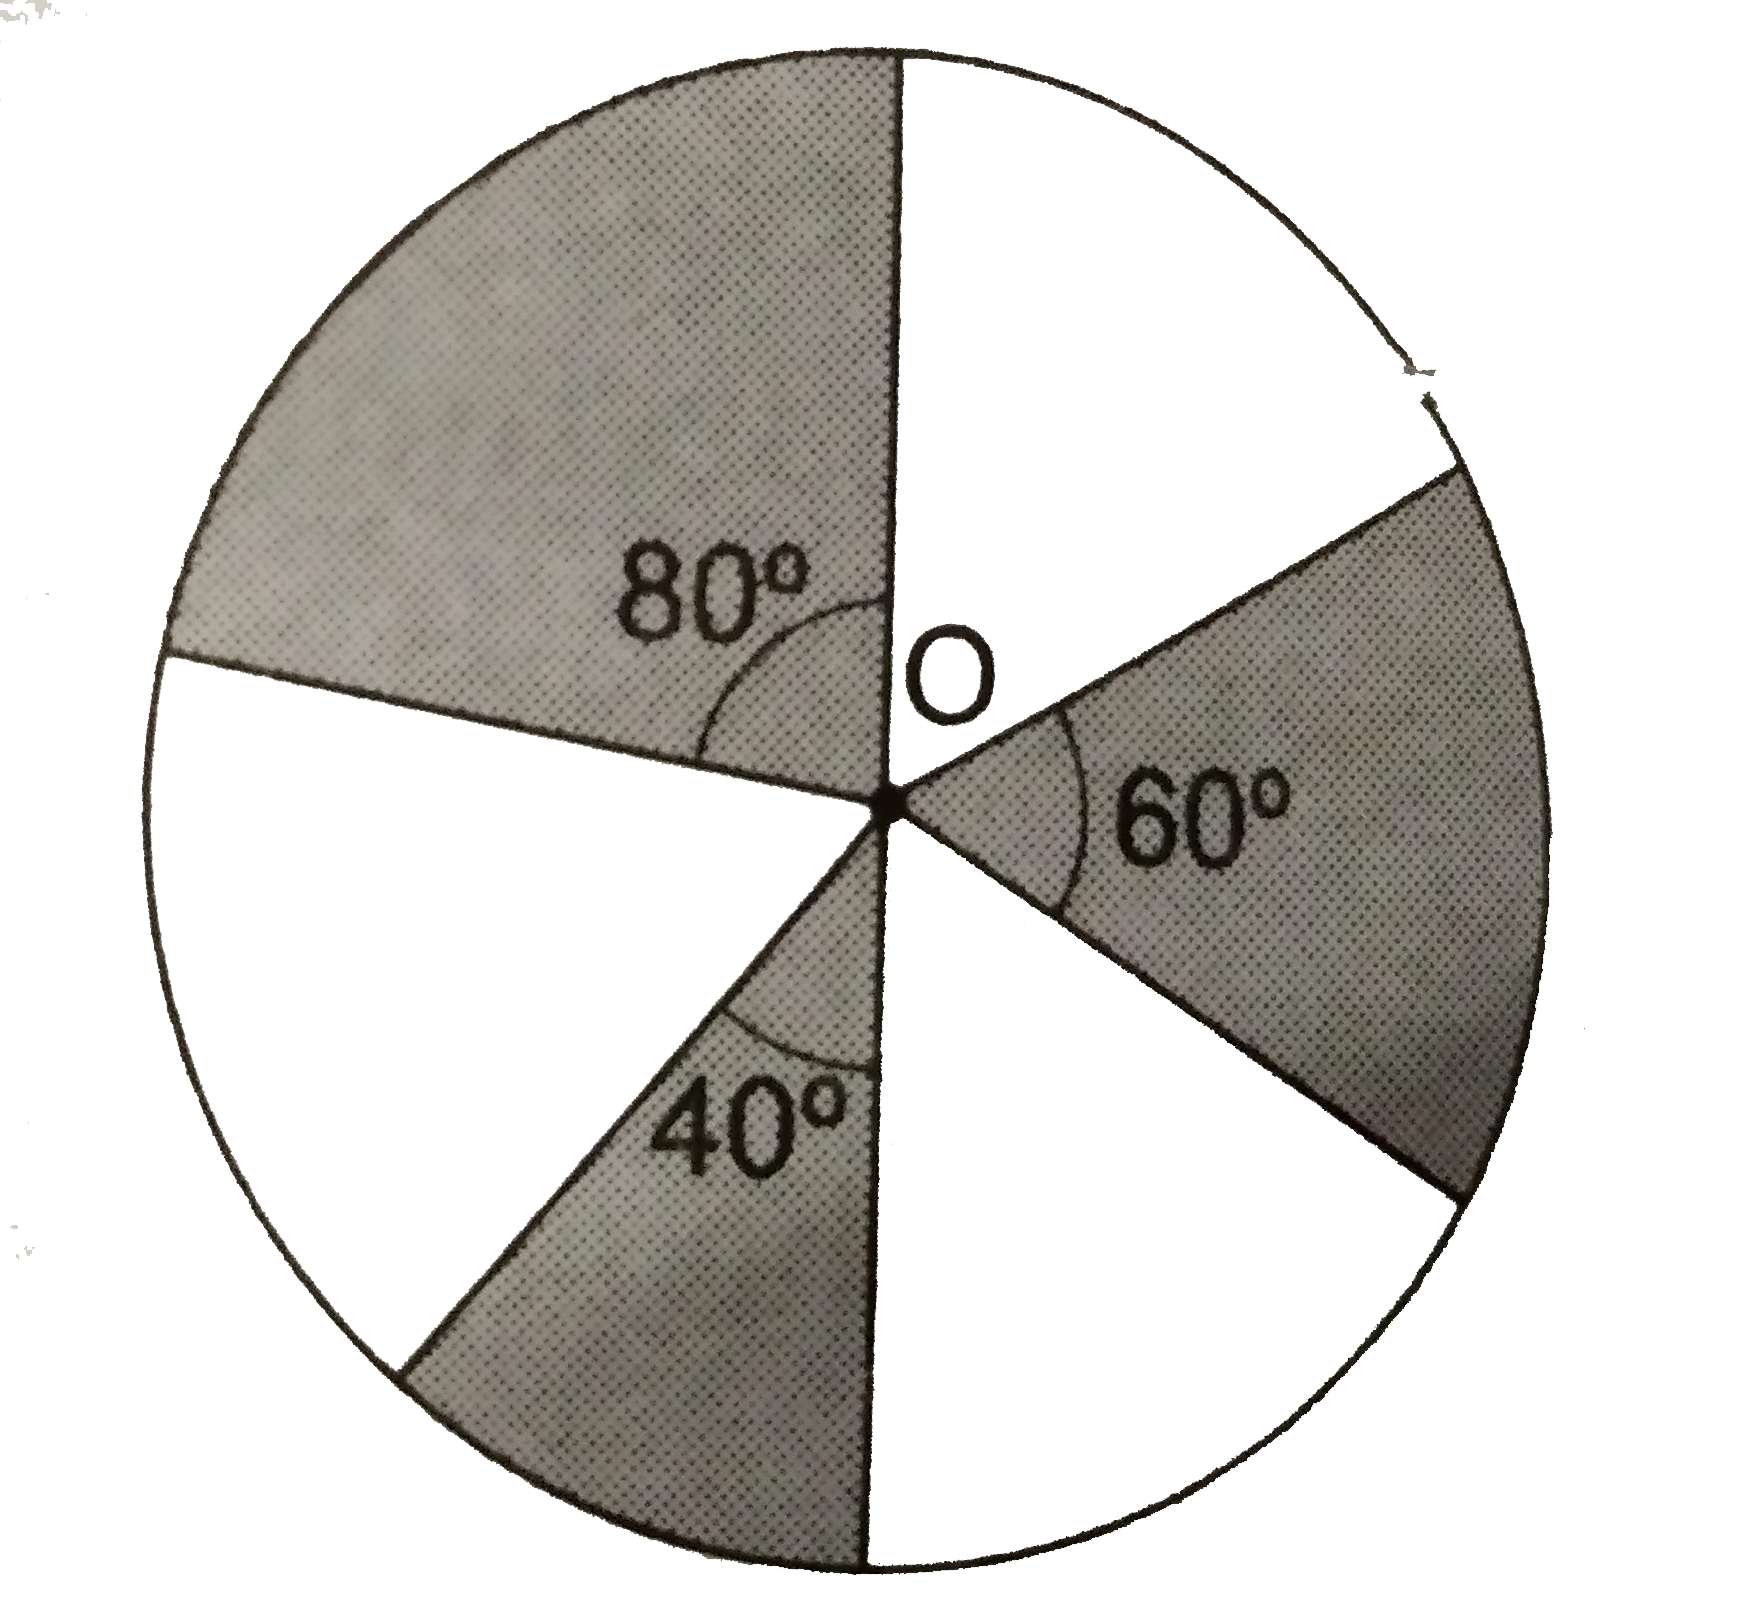 In the given figure, three sectors of a circle of radius 7 cm, making angle sof 60^(@), 80^(@) and 40^(@) at the centre are shaded. Find the area of the shaded region.